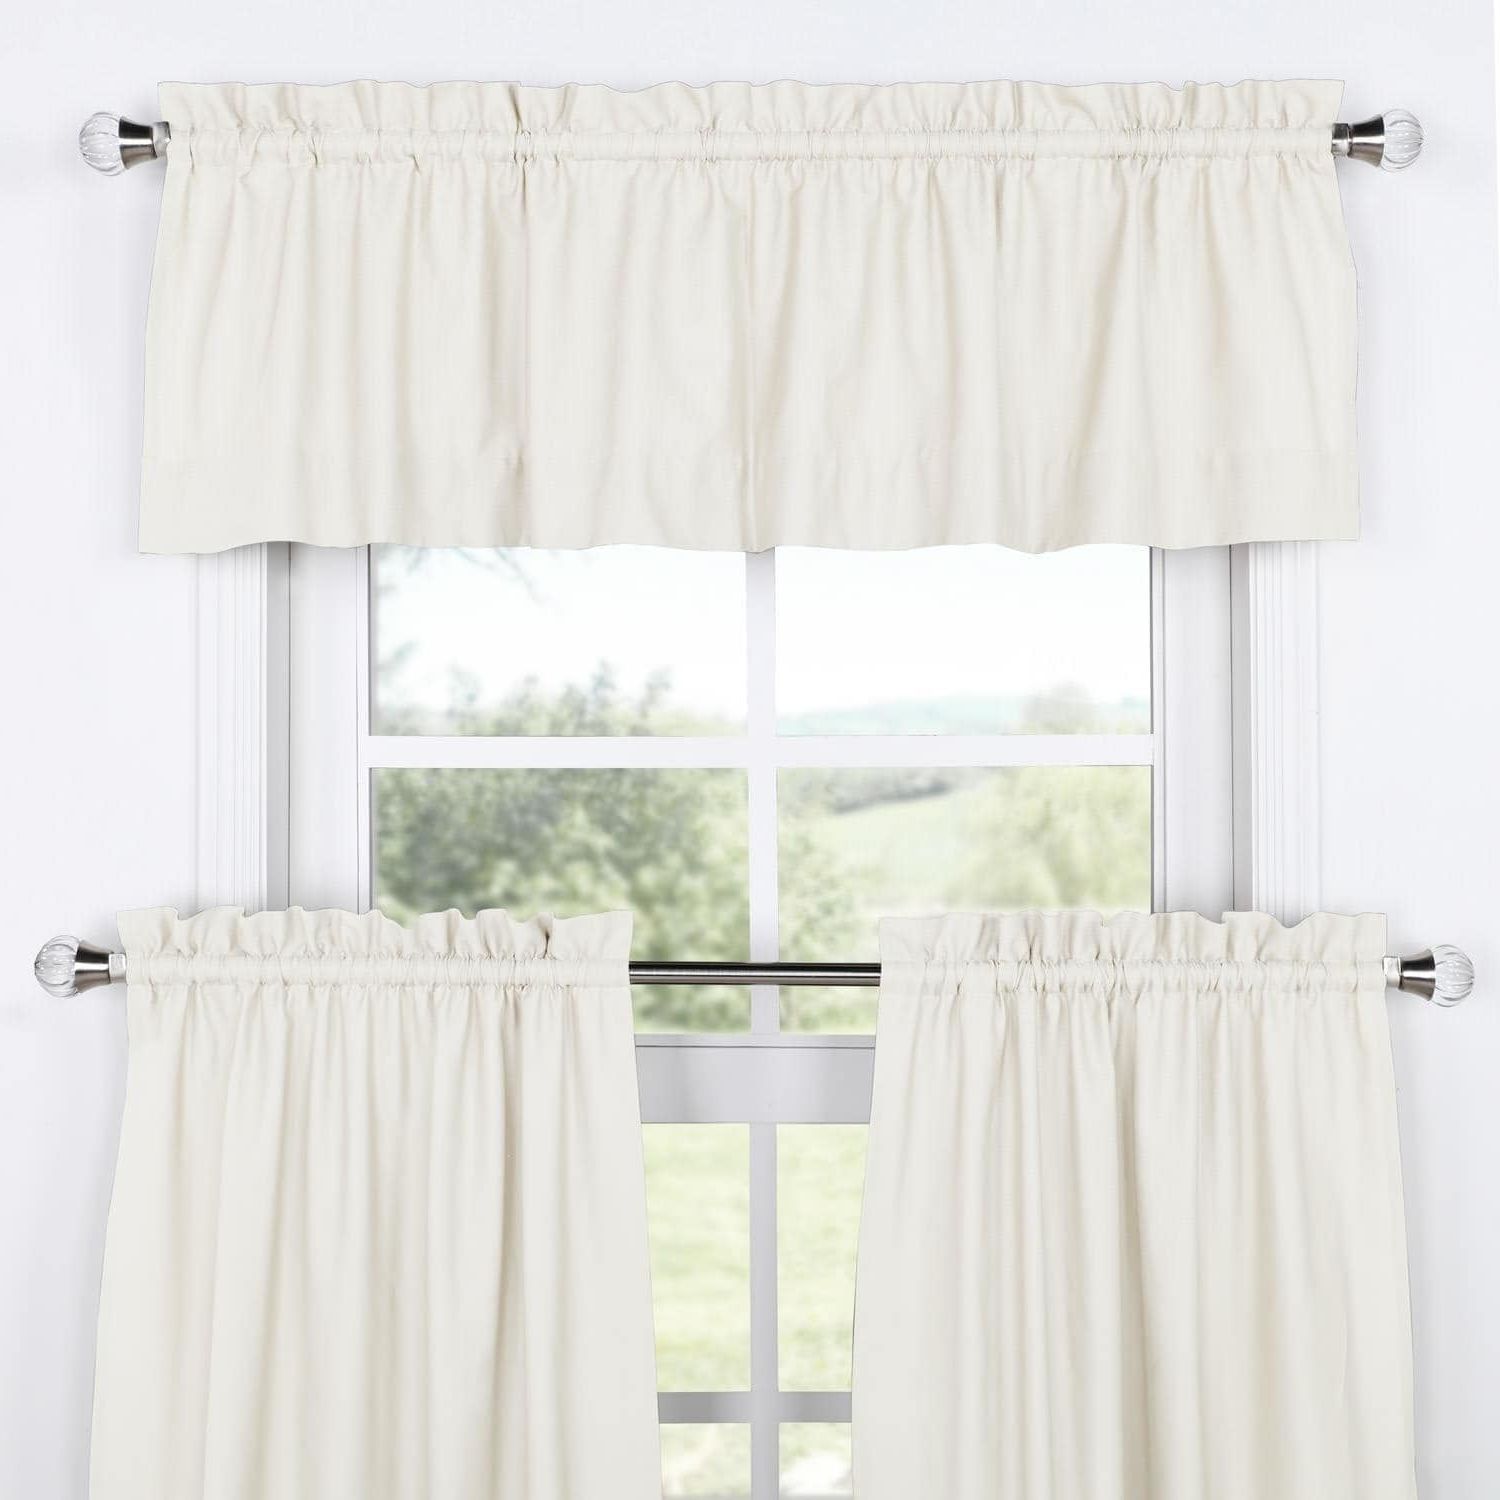 Exclusive Fabrics Solid Cotton Kitchen Tier Curtain & Valance Set (3pc) For Recent Bermuda Ruffle Kitchen Curtain Tier Sets (View 19 of 20)